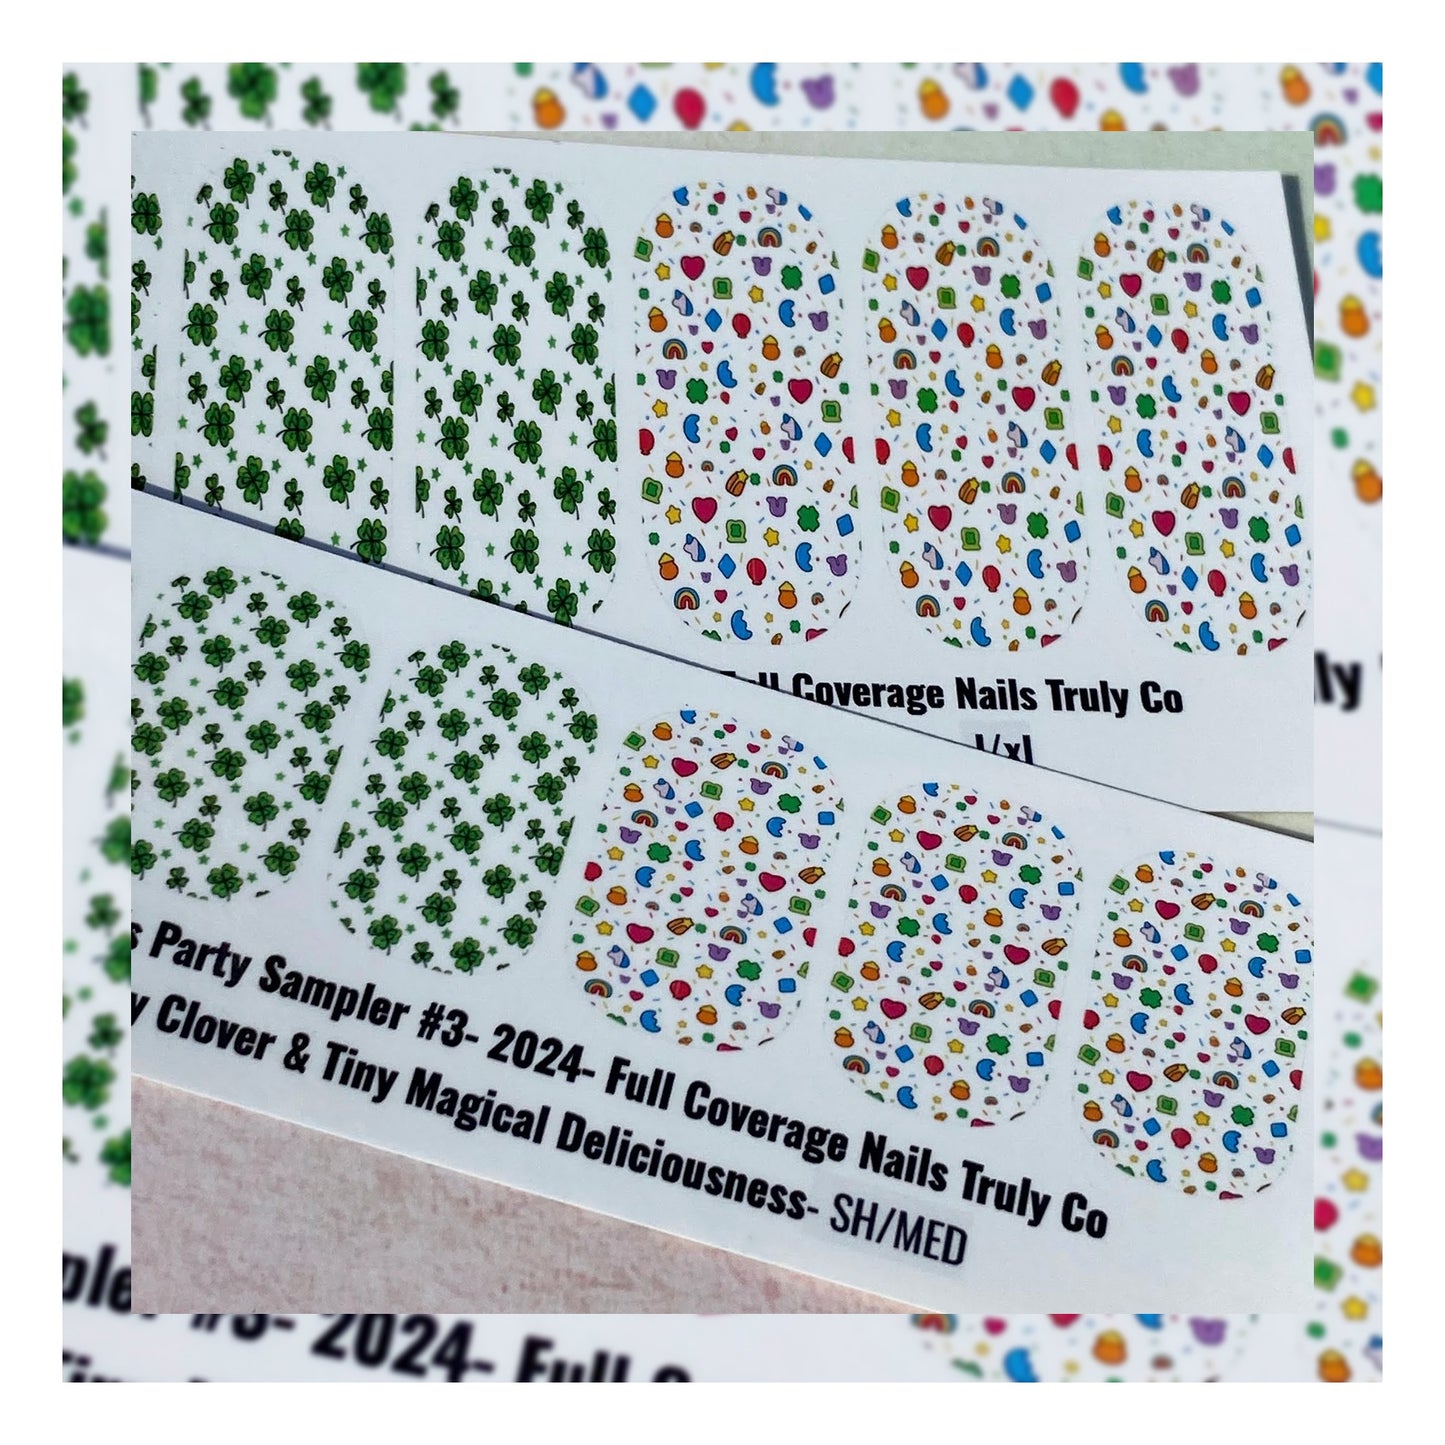 St. Patrick's Day Nail Wrap Decals-St Patrick's Party Sampler #3